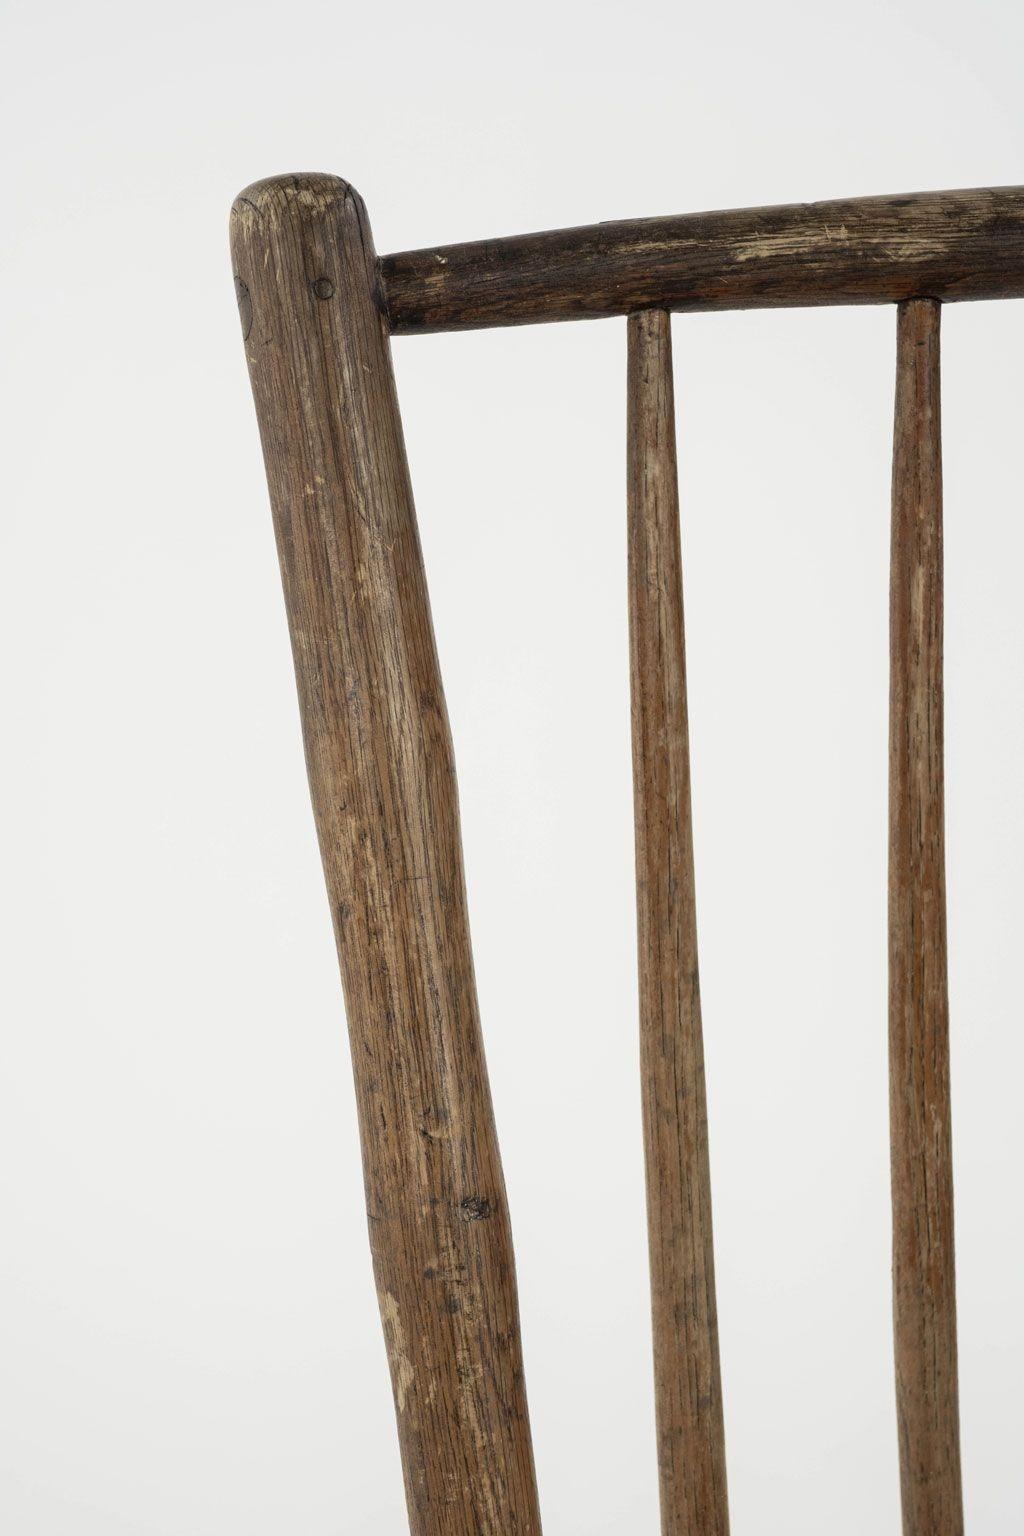 Rod-back windsor side chair with a square-shape back. Carved and turned faux-bamboo stiles, splayed legs and stretchers in ash. Shaped seat in elm. Remnants of dark brown paint. Sturdy, no wobble. Joints tightened. Dates from early-to-Mid-19th